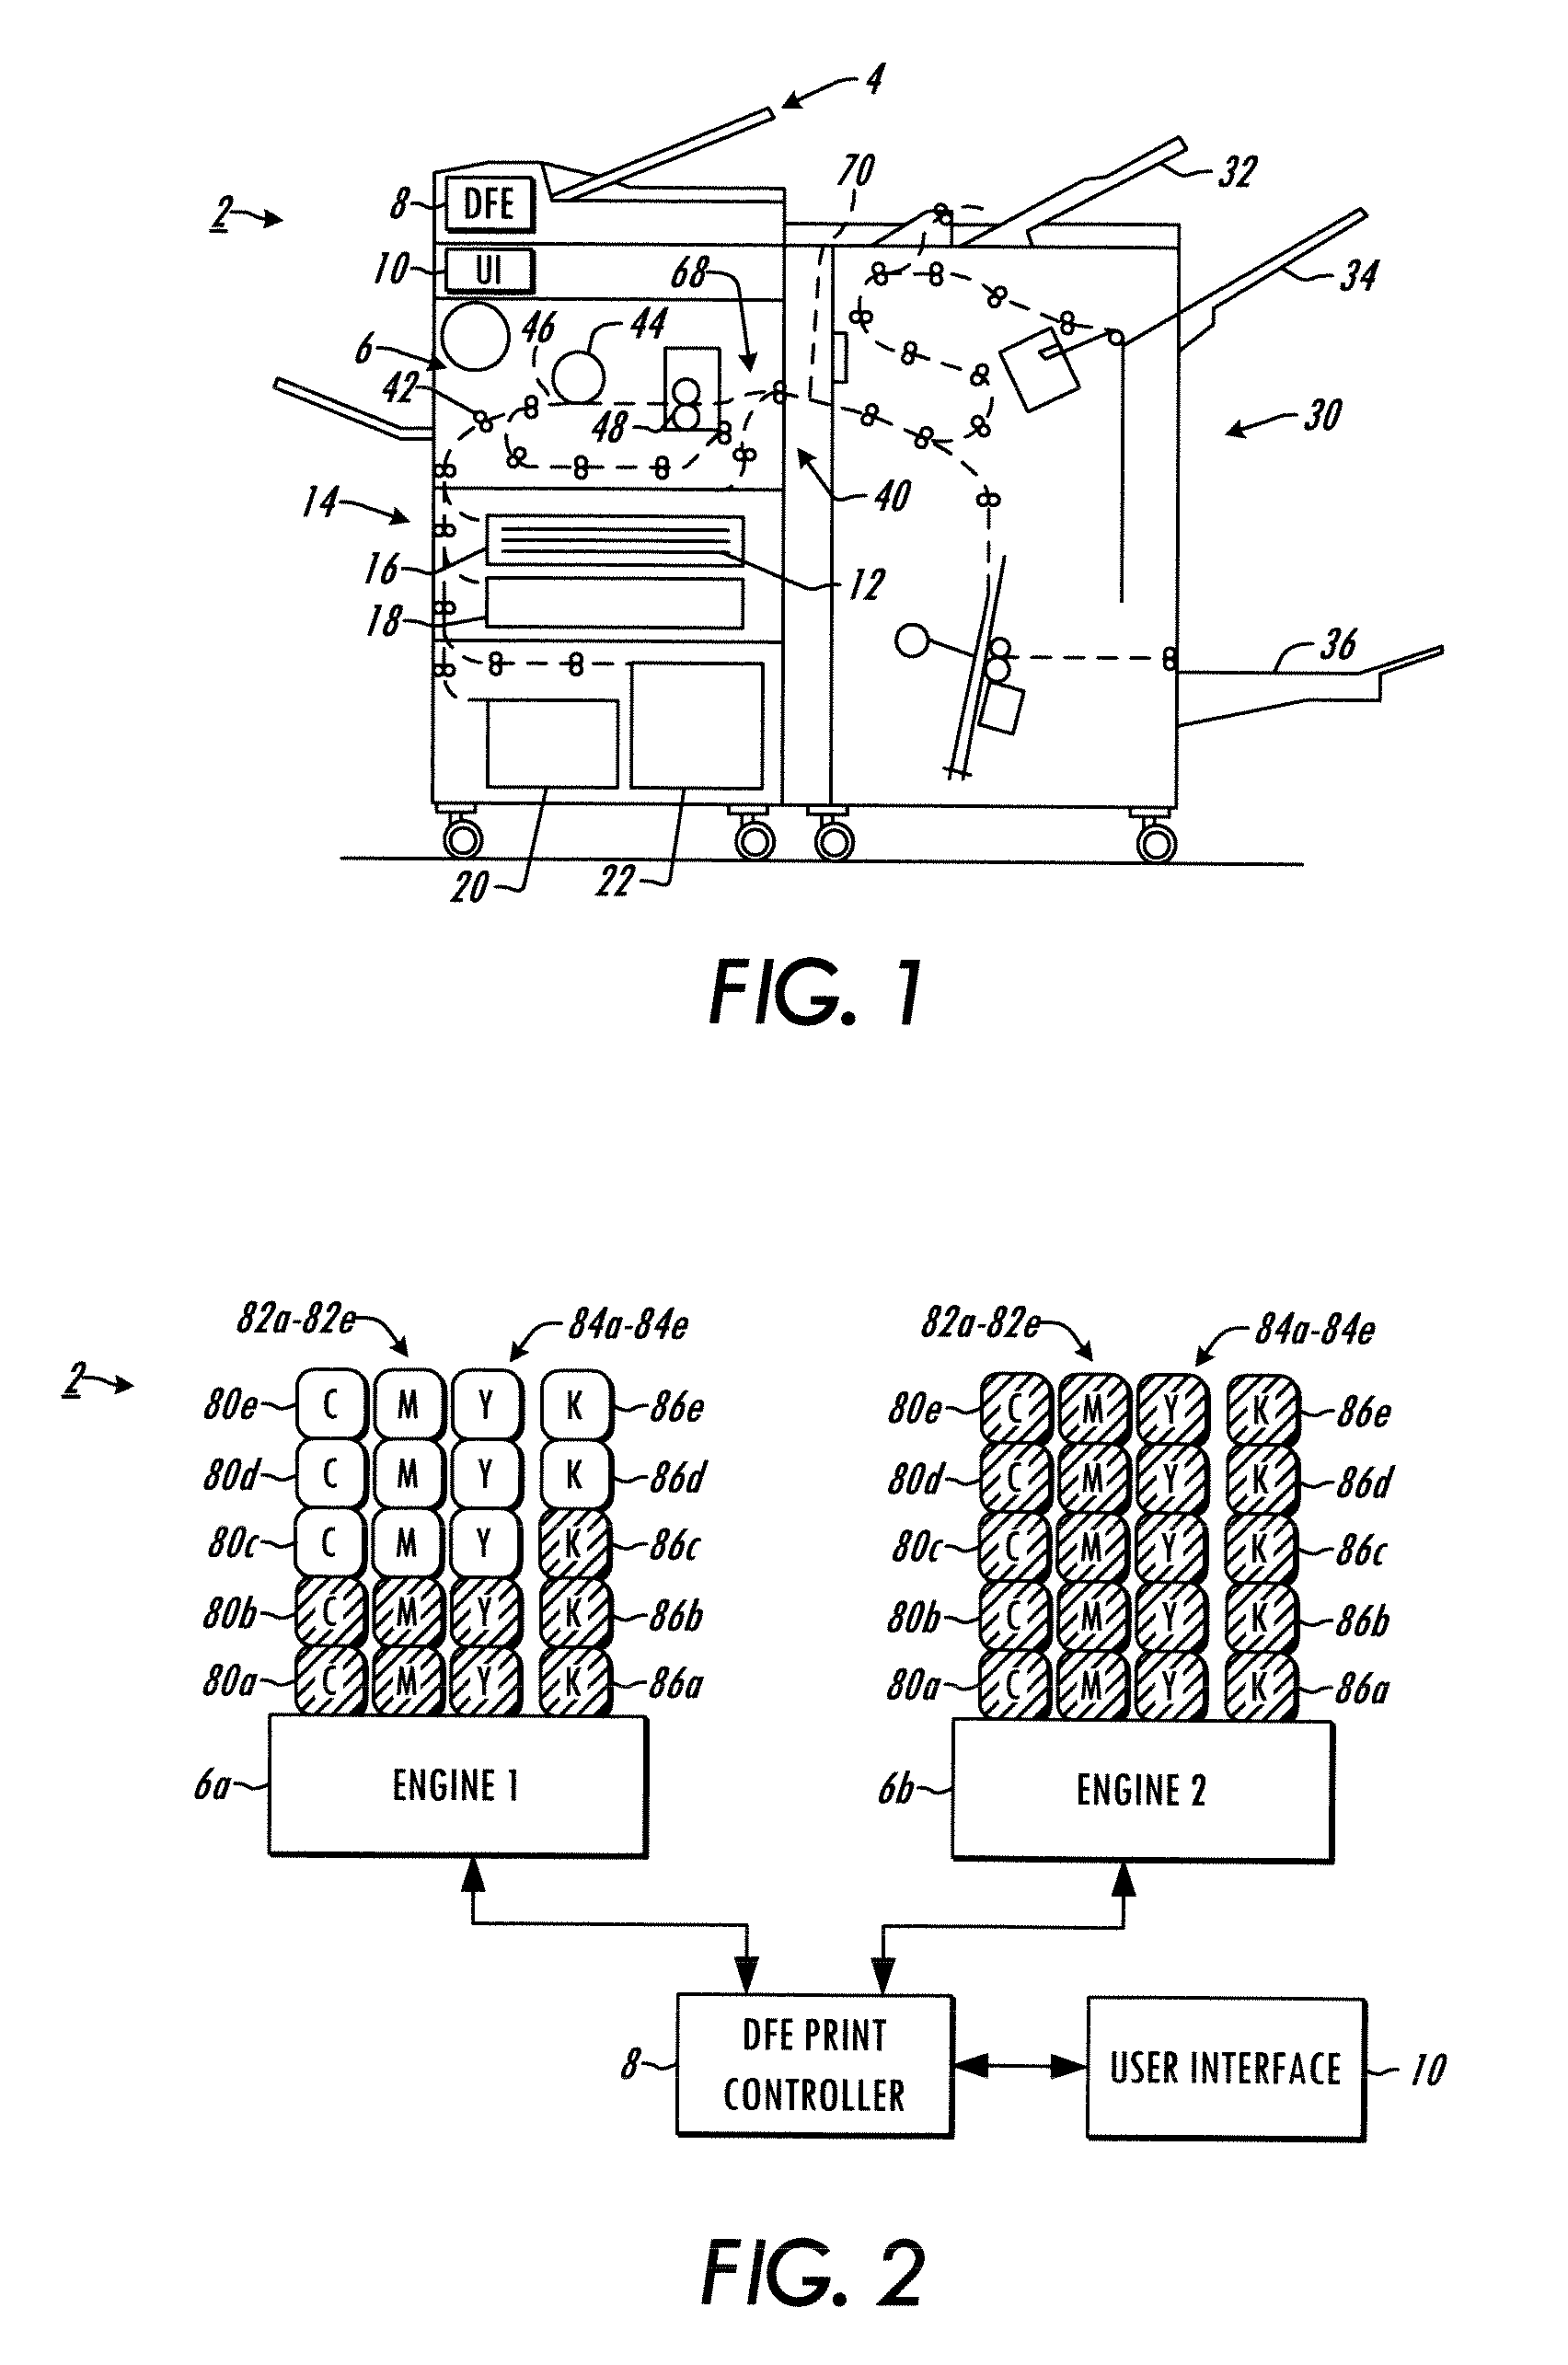 Document processing system and method for adjustable print consumable refill level